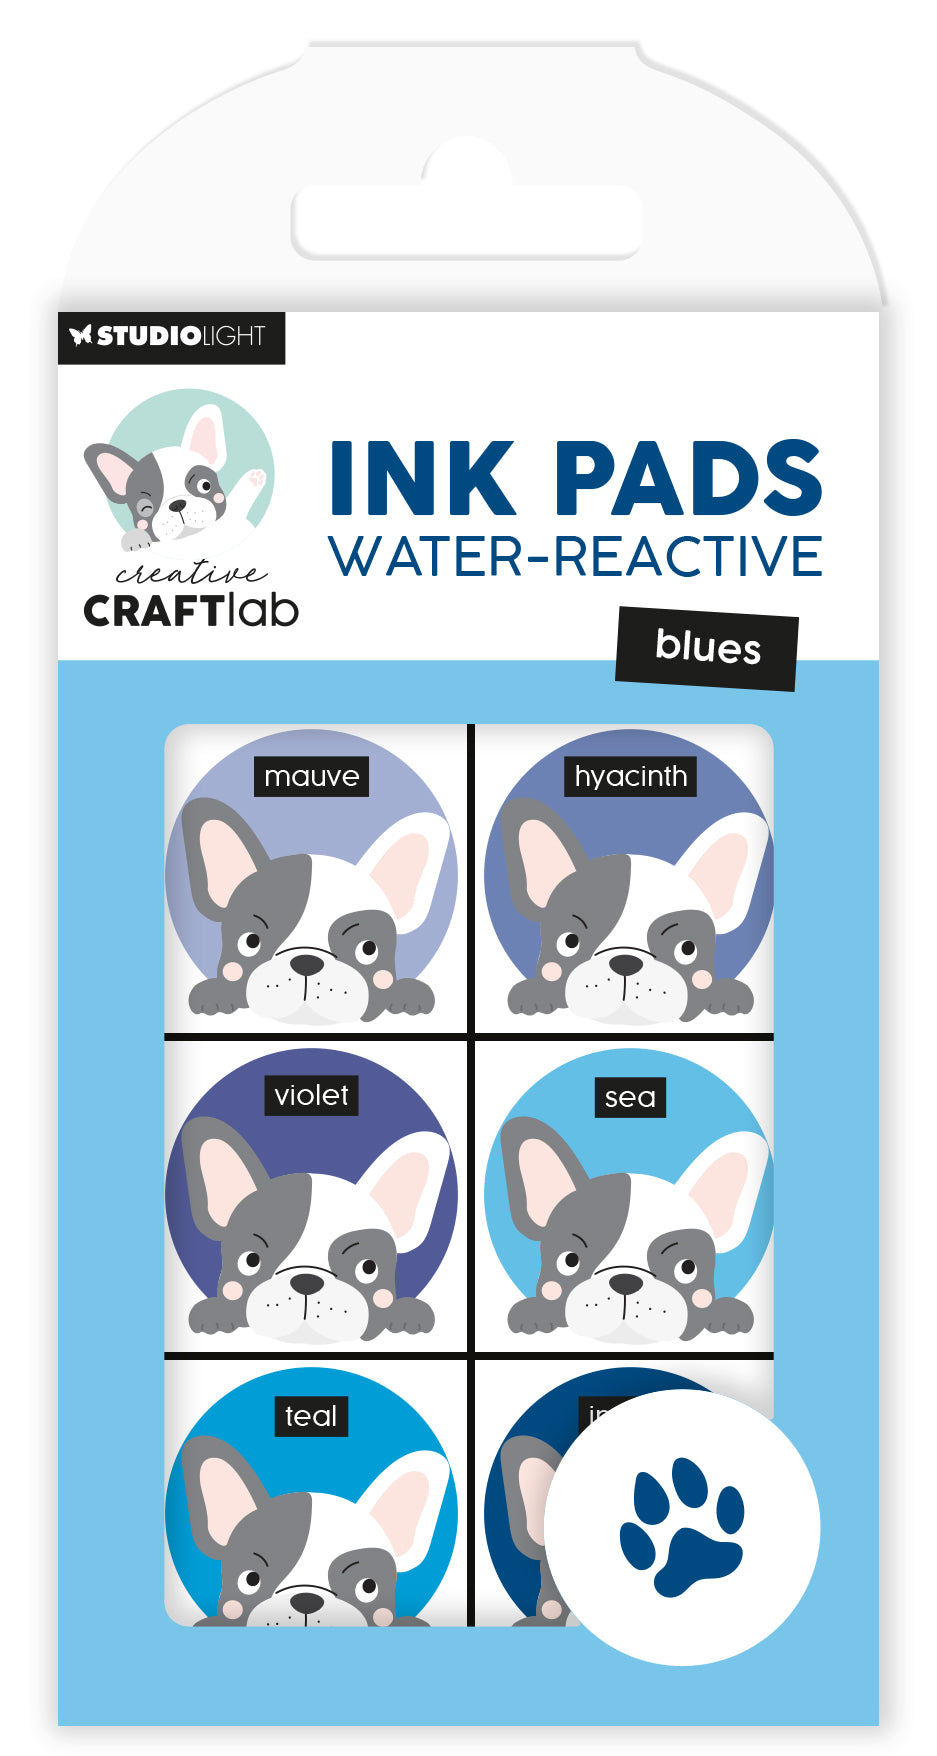 CCL Ink Pads Water-Reactive Blues Essentials 120x70x16mm 6 PC nr.23